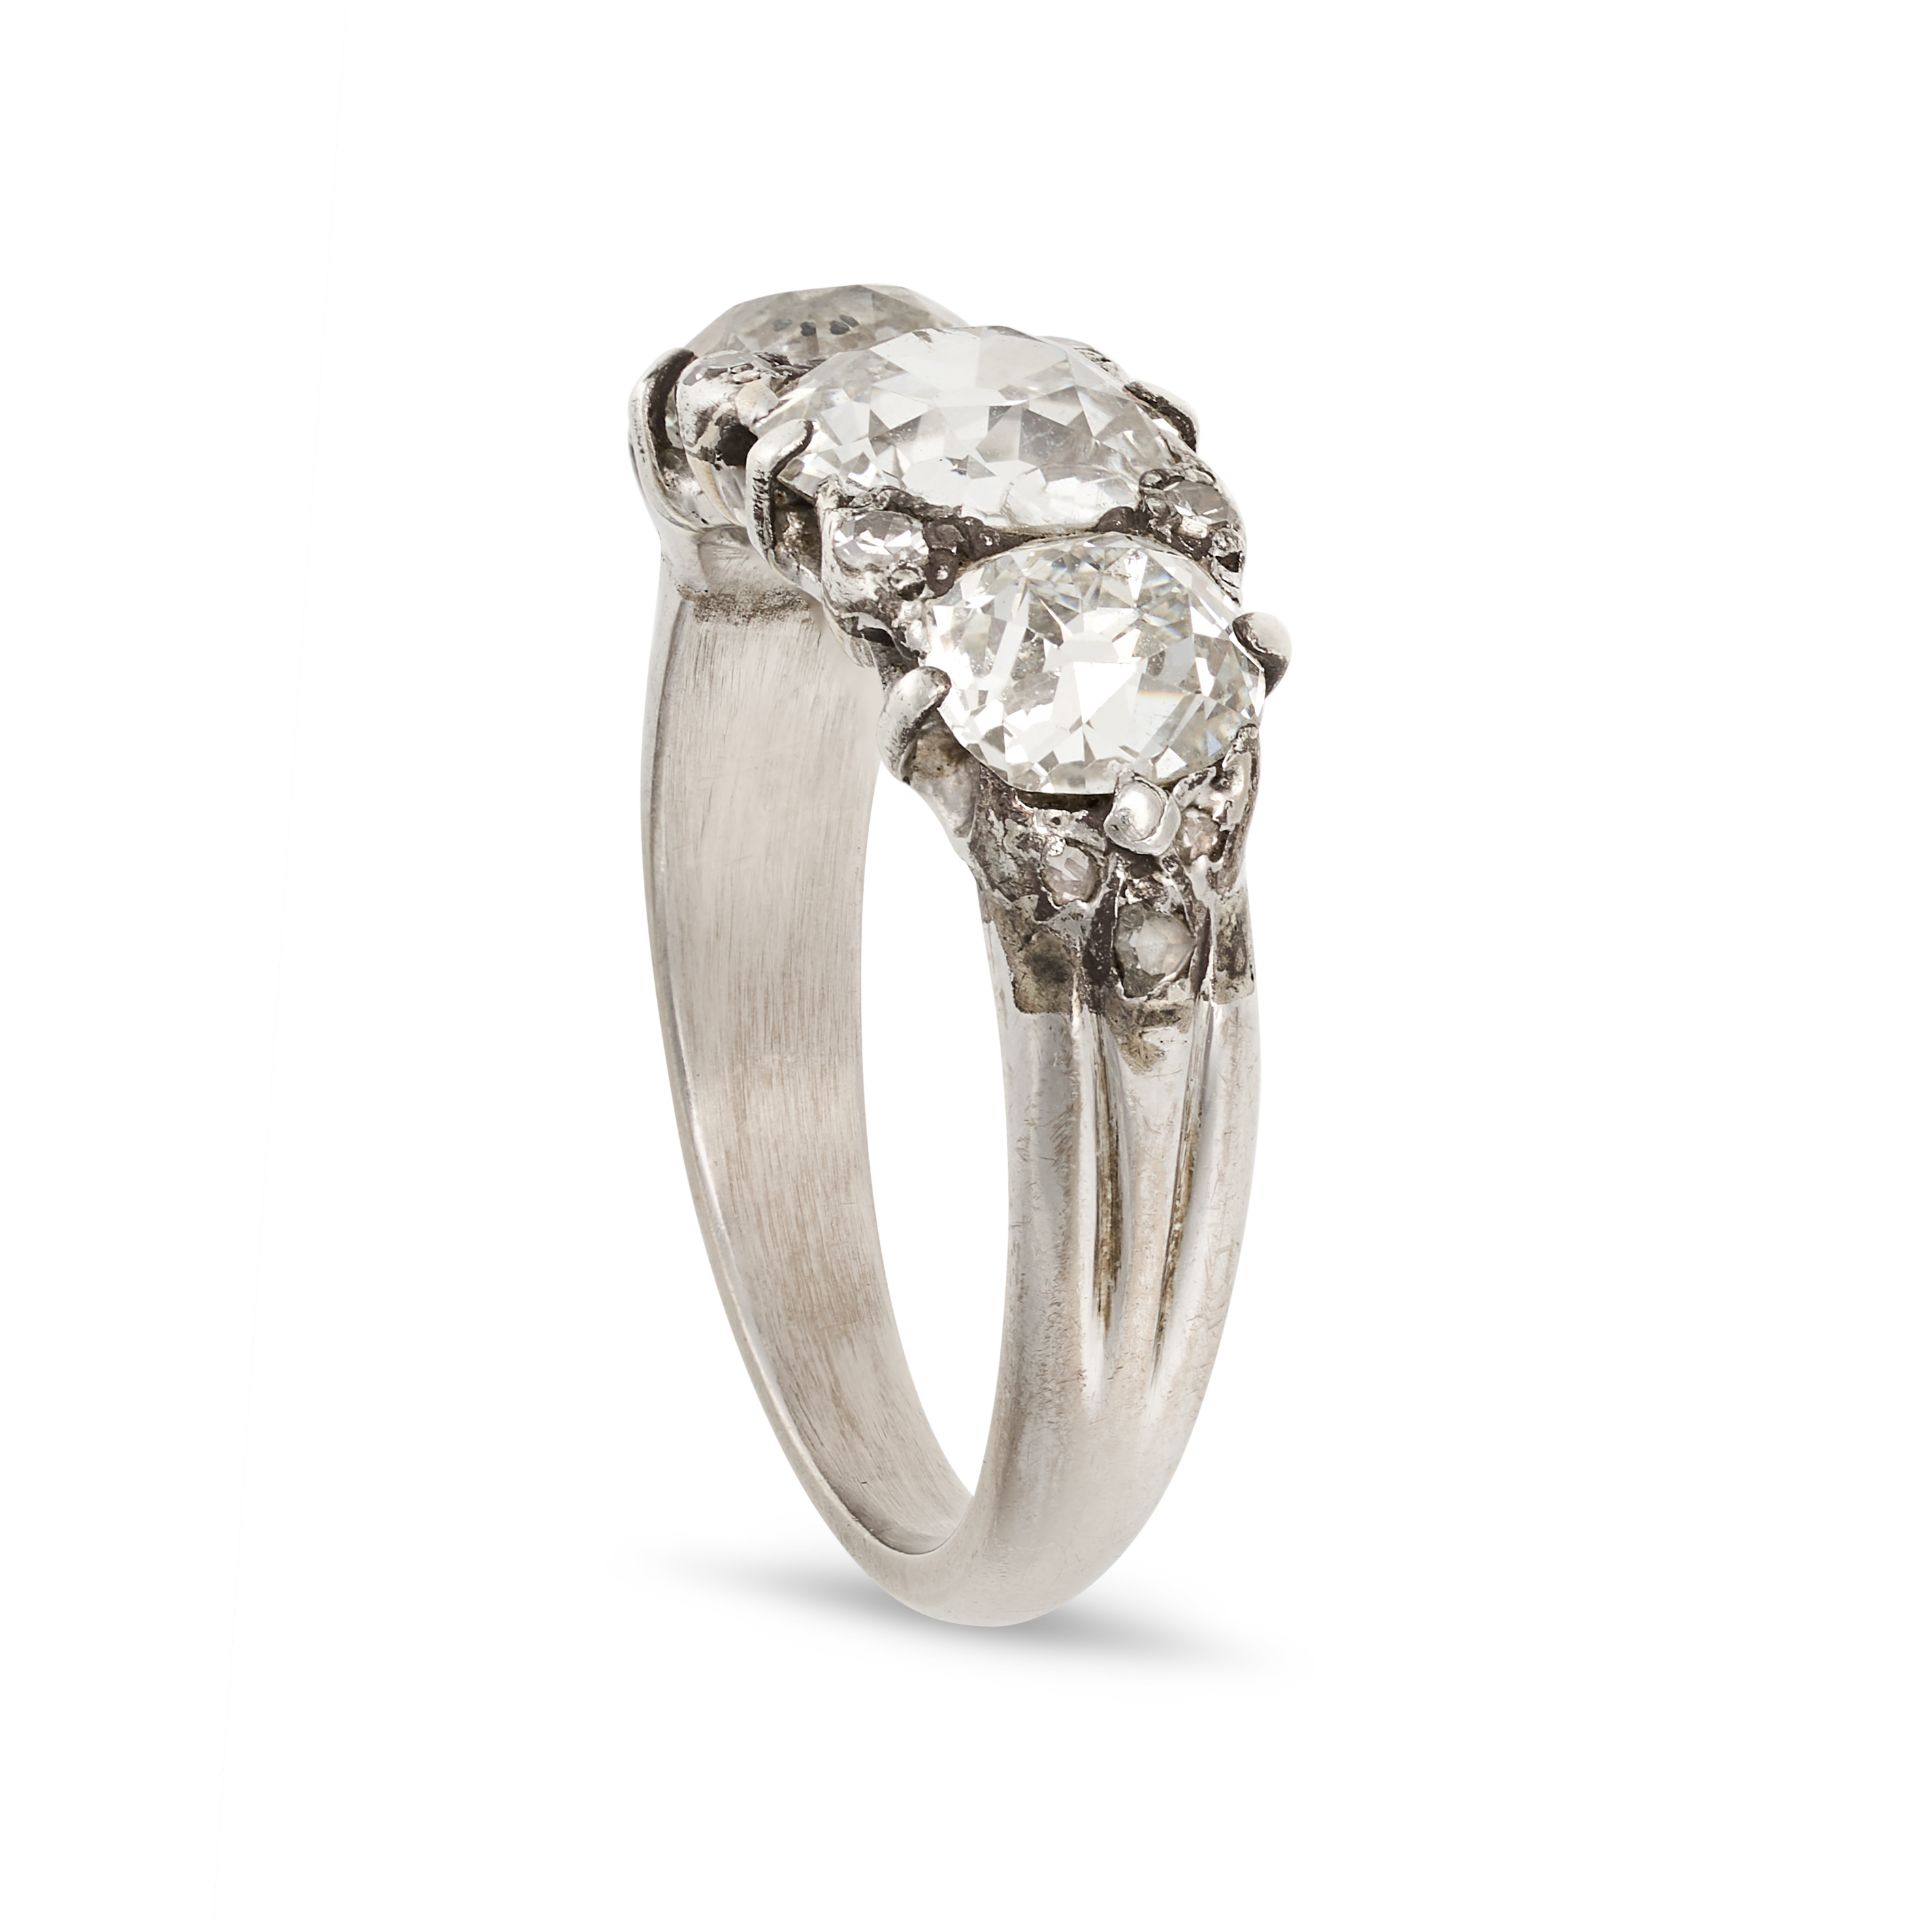 AN ANTIQUE DIAMOND THREE STONE RING in 18ct white gold, set with three old cut diamonds accented ... - Image 2 of 2